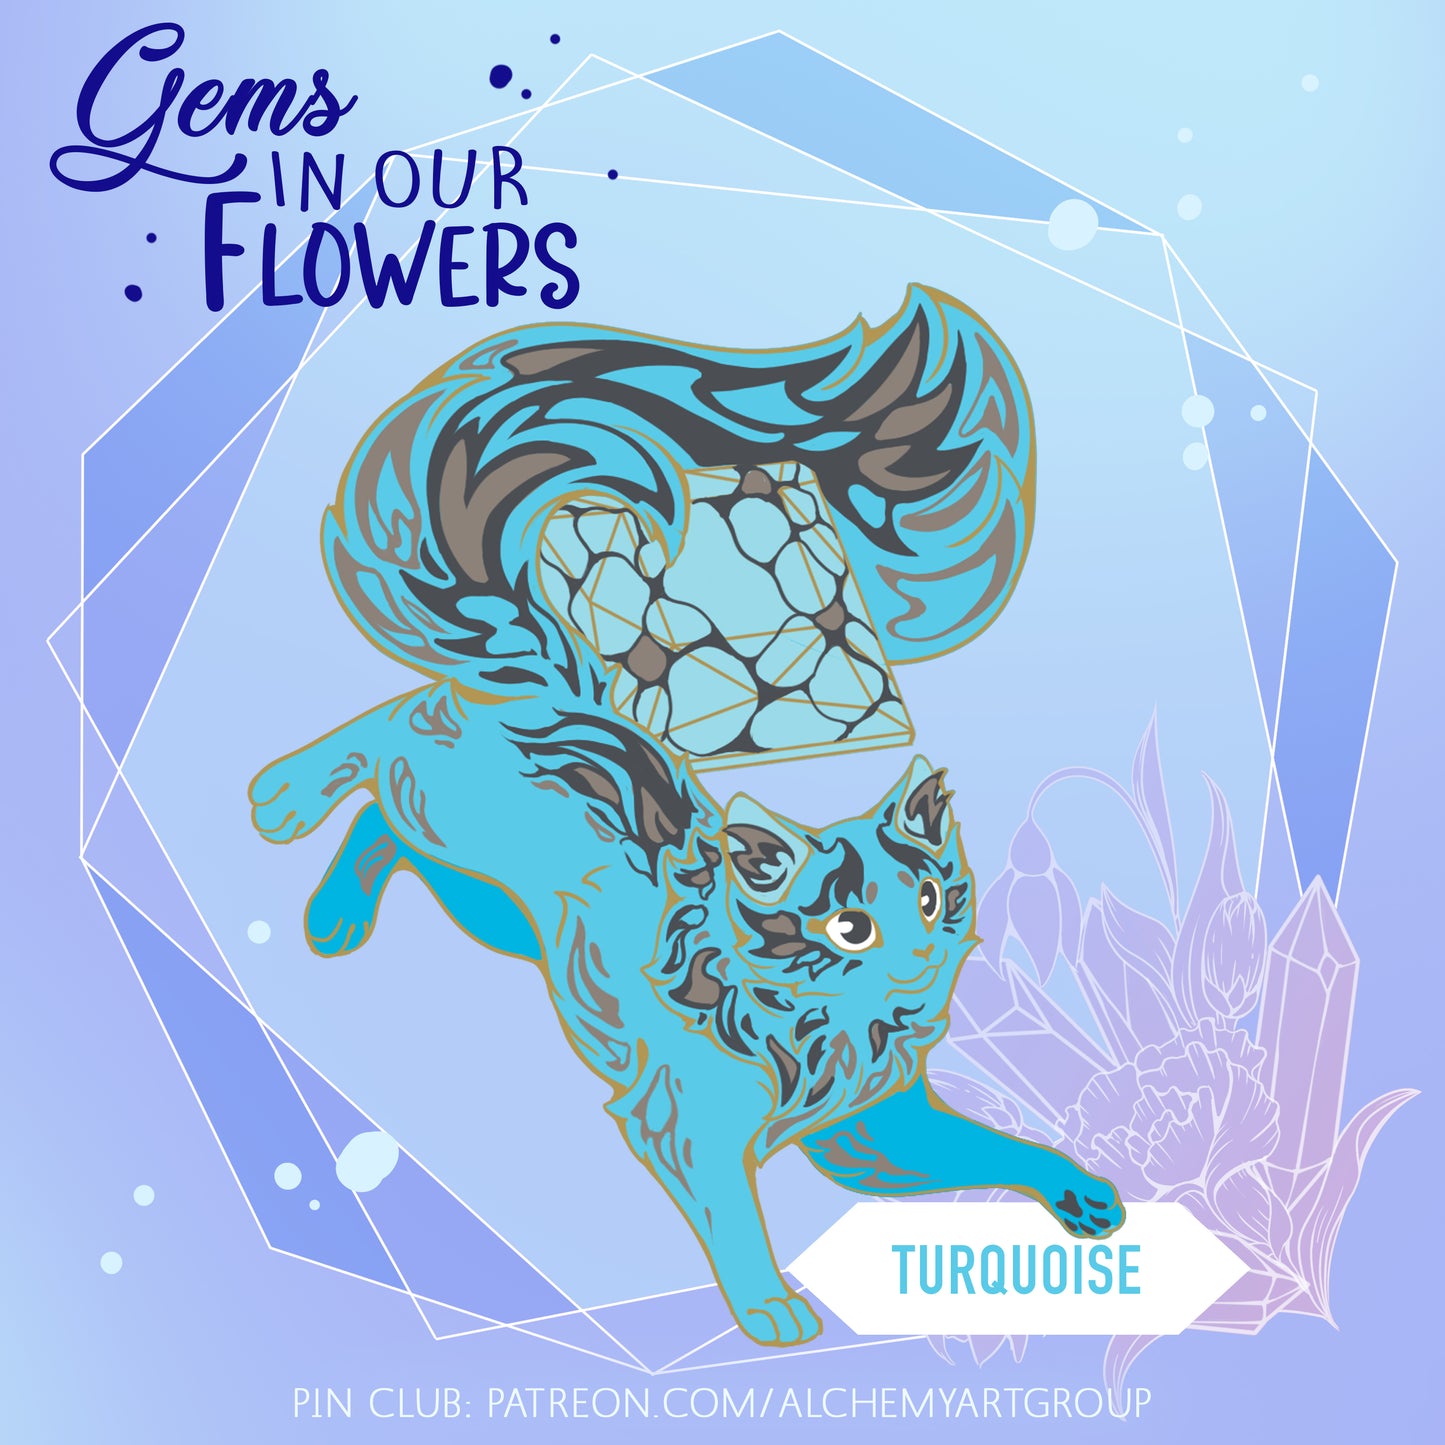 [Gems in our Flowers] Turquoise - December Birthstone [Preorder]